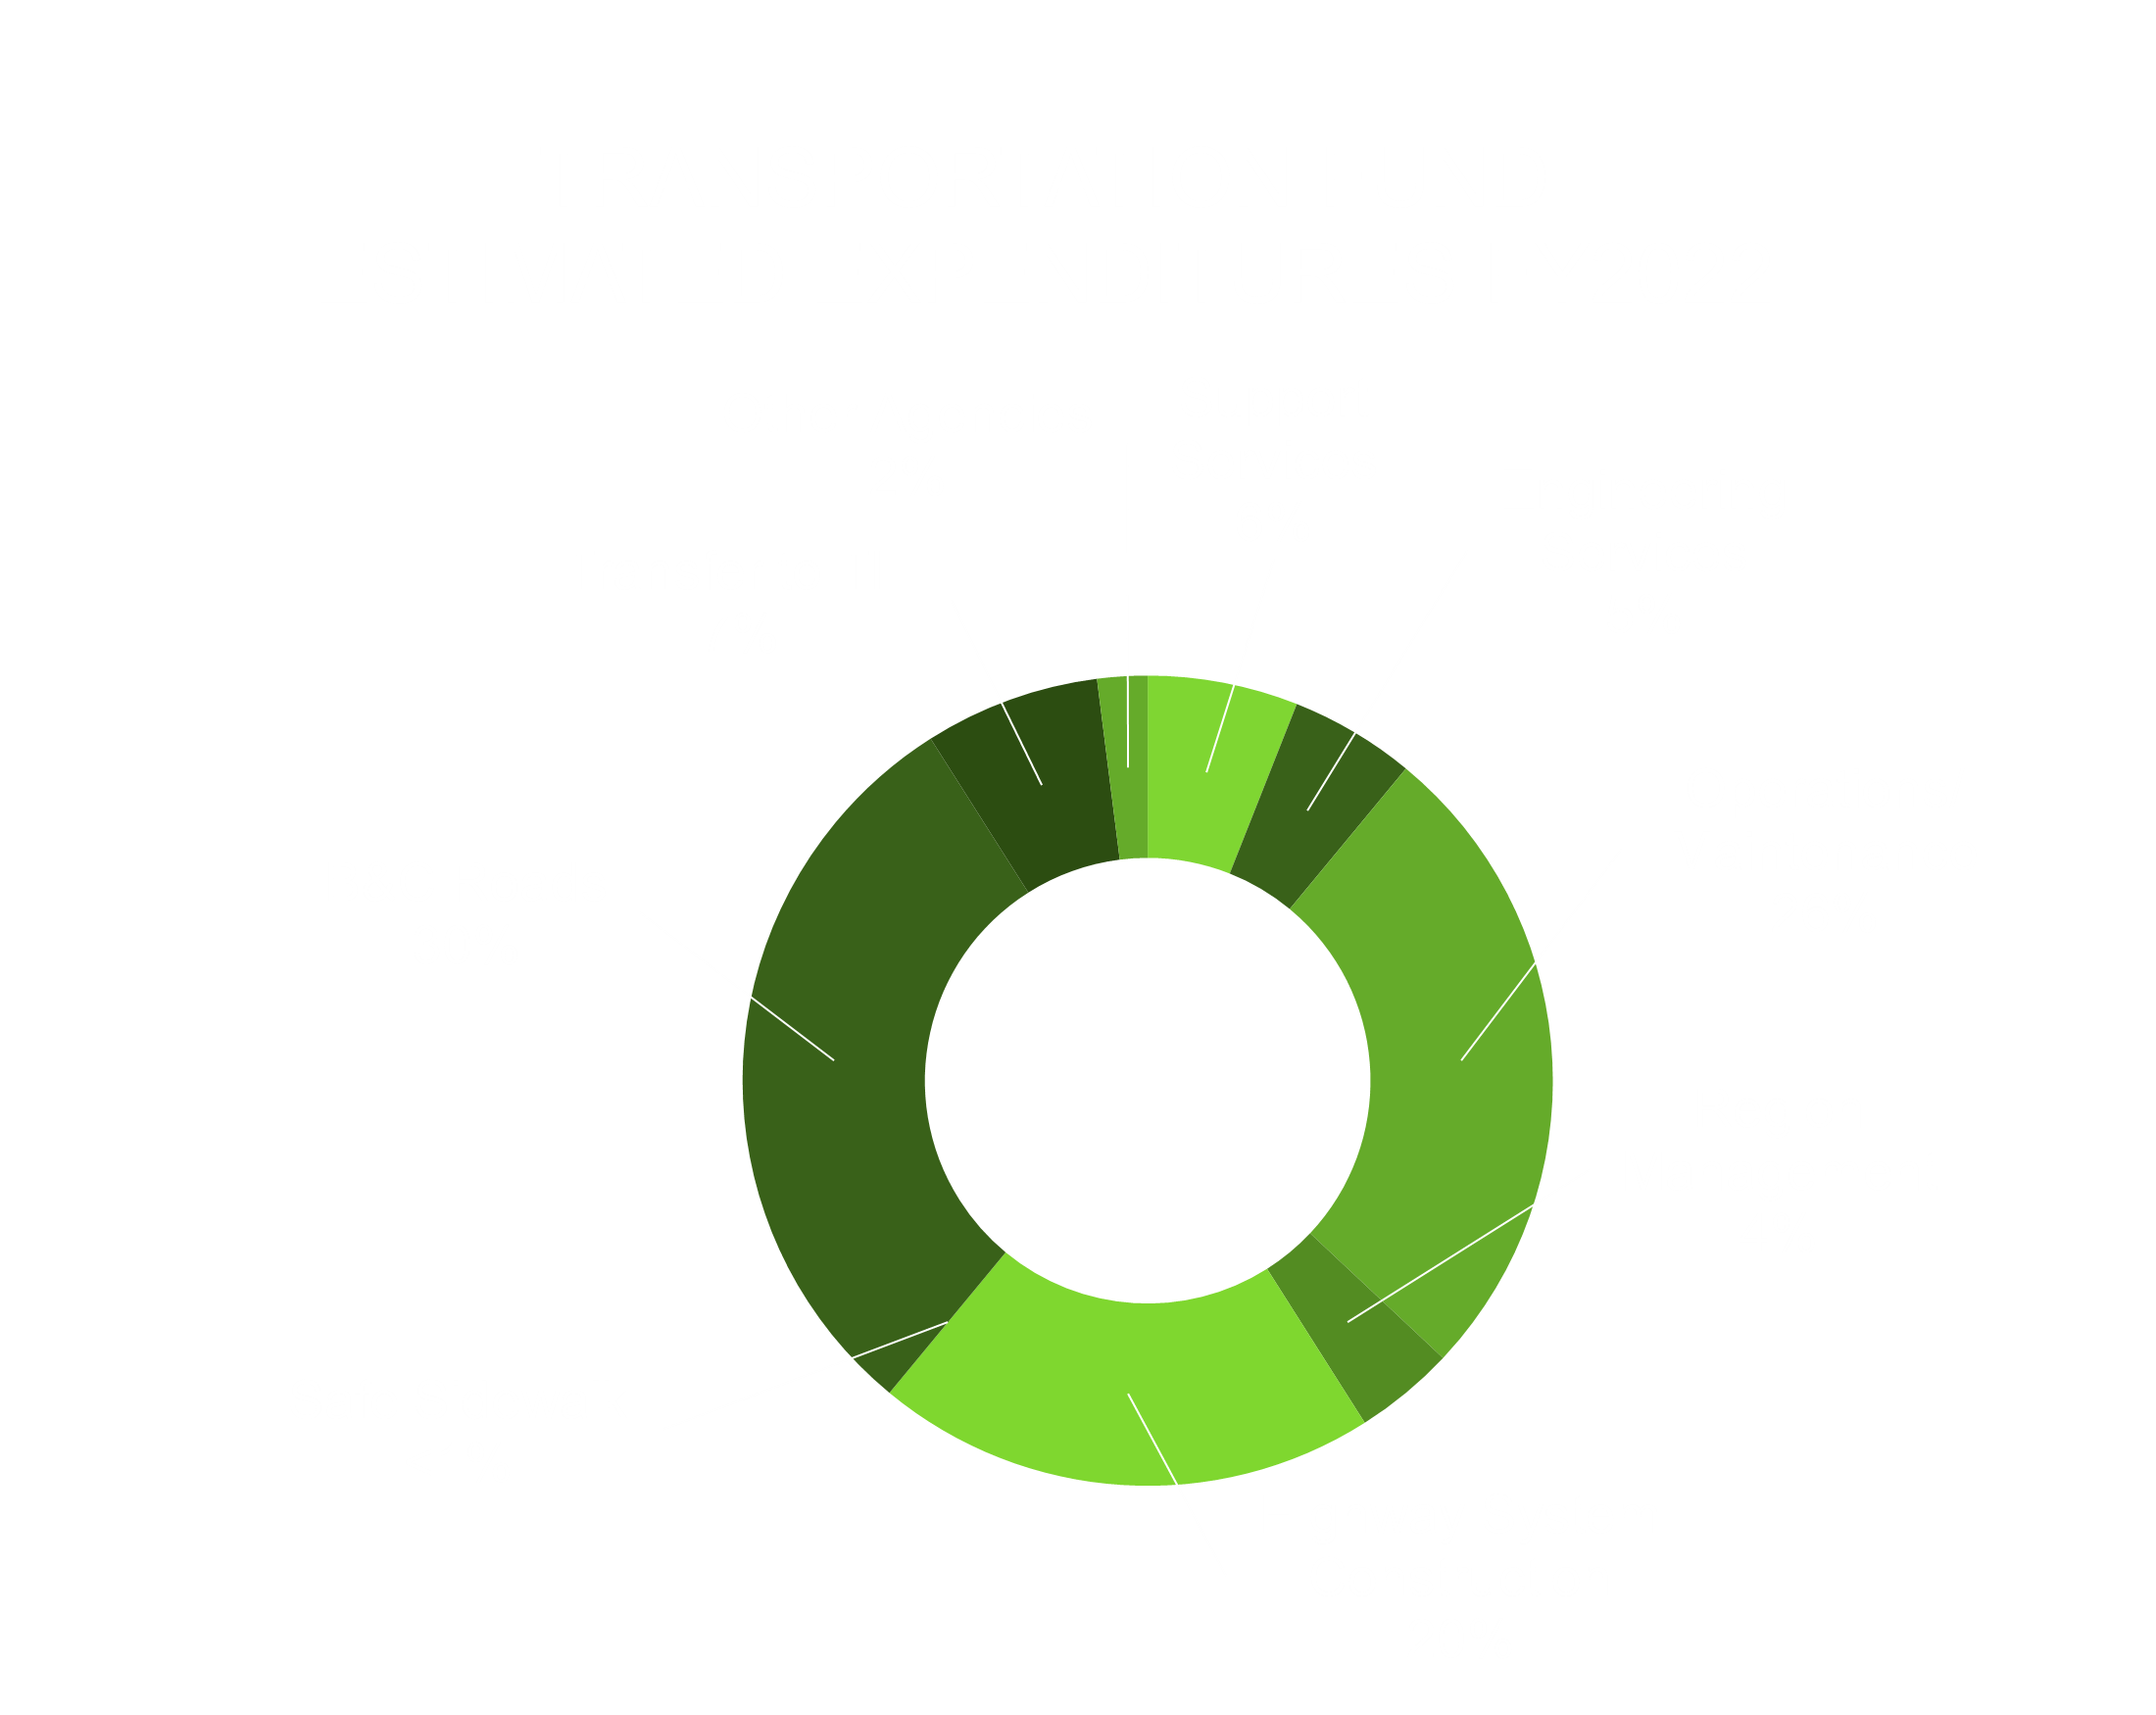 Transportation Fund Estimated Expenditures Fiscal Year 2020 shows 30% B & C Roads, 23% Construction Management, 26% Operations/Equipment, 6% Support Services, 5% Transfer to TIF, 4% Region Management, 4% Engineering Services, 2% Other Agencies, and less than 1% Safe Sidewalk